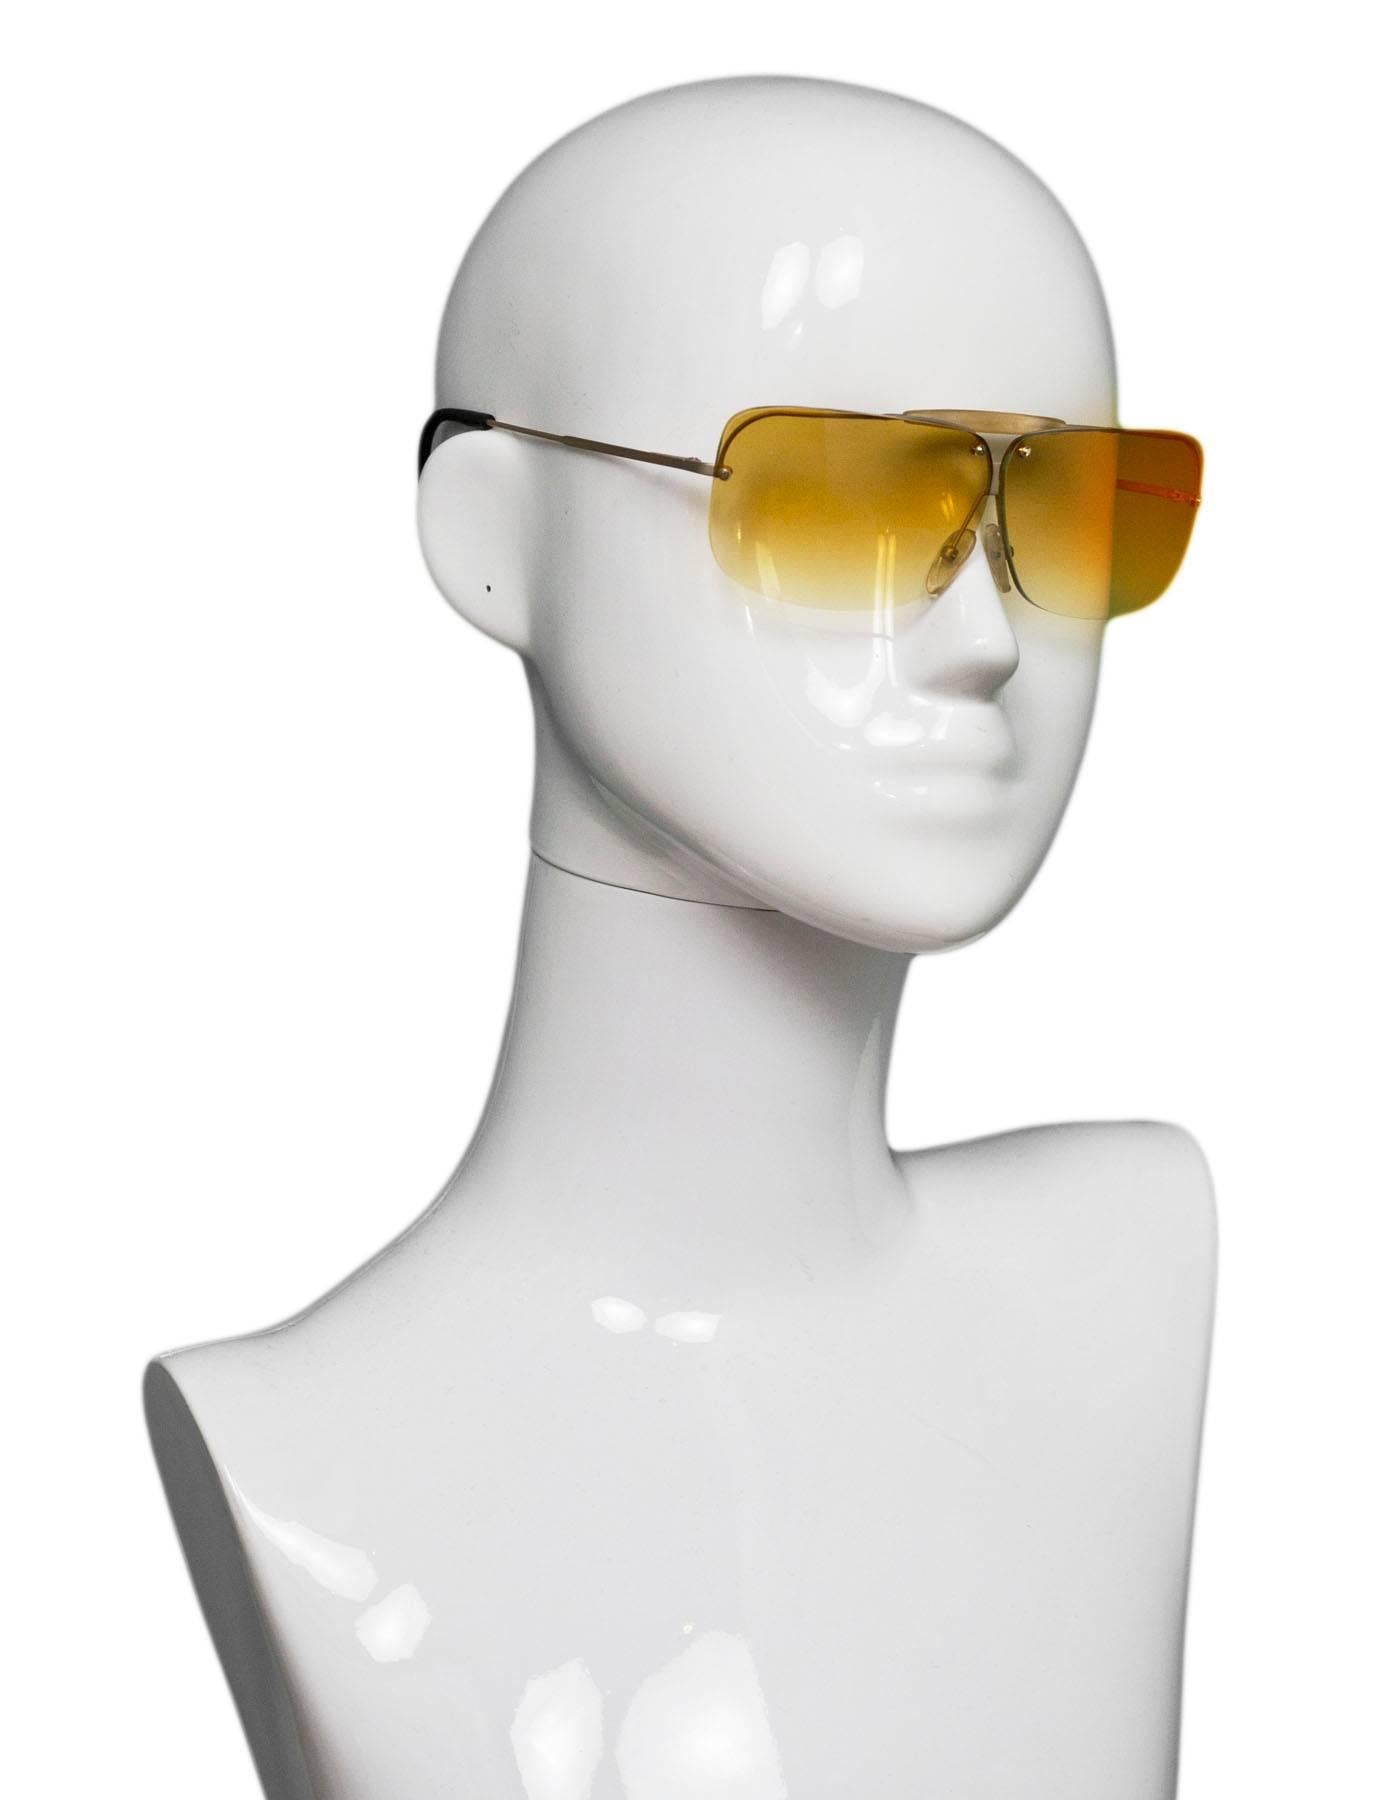 Bottega Veneta Vintage Ombre Sunglasses

Made In: Italy
Color: Yellow
Materials: Resin, metal
Overall Condition: Excellent vintage pre-owned condition, light surface marks
Included: Bottega Veneta case
Measurements: 
Across: 5.25"
Lens: